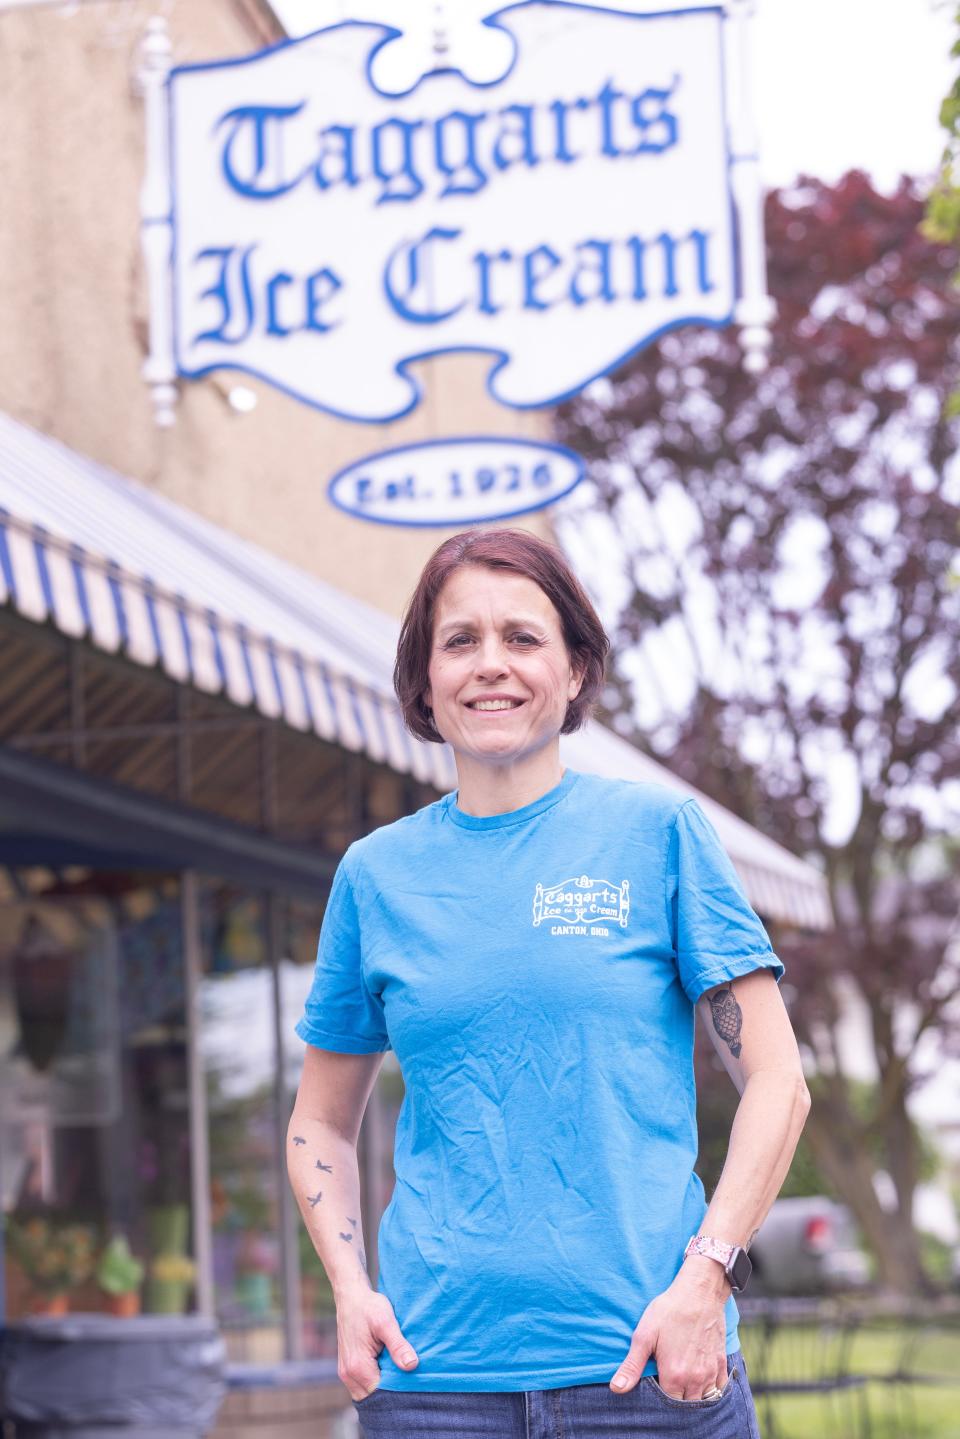 Mindy Mullaly is the owner of Taggarts Ice Cream in Canton. She and her family also own Kennedy's Bar-B-Que.